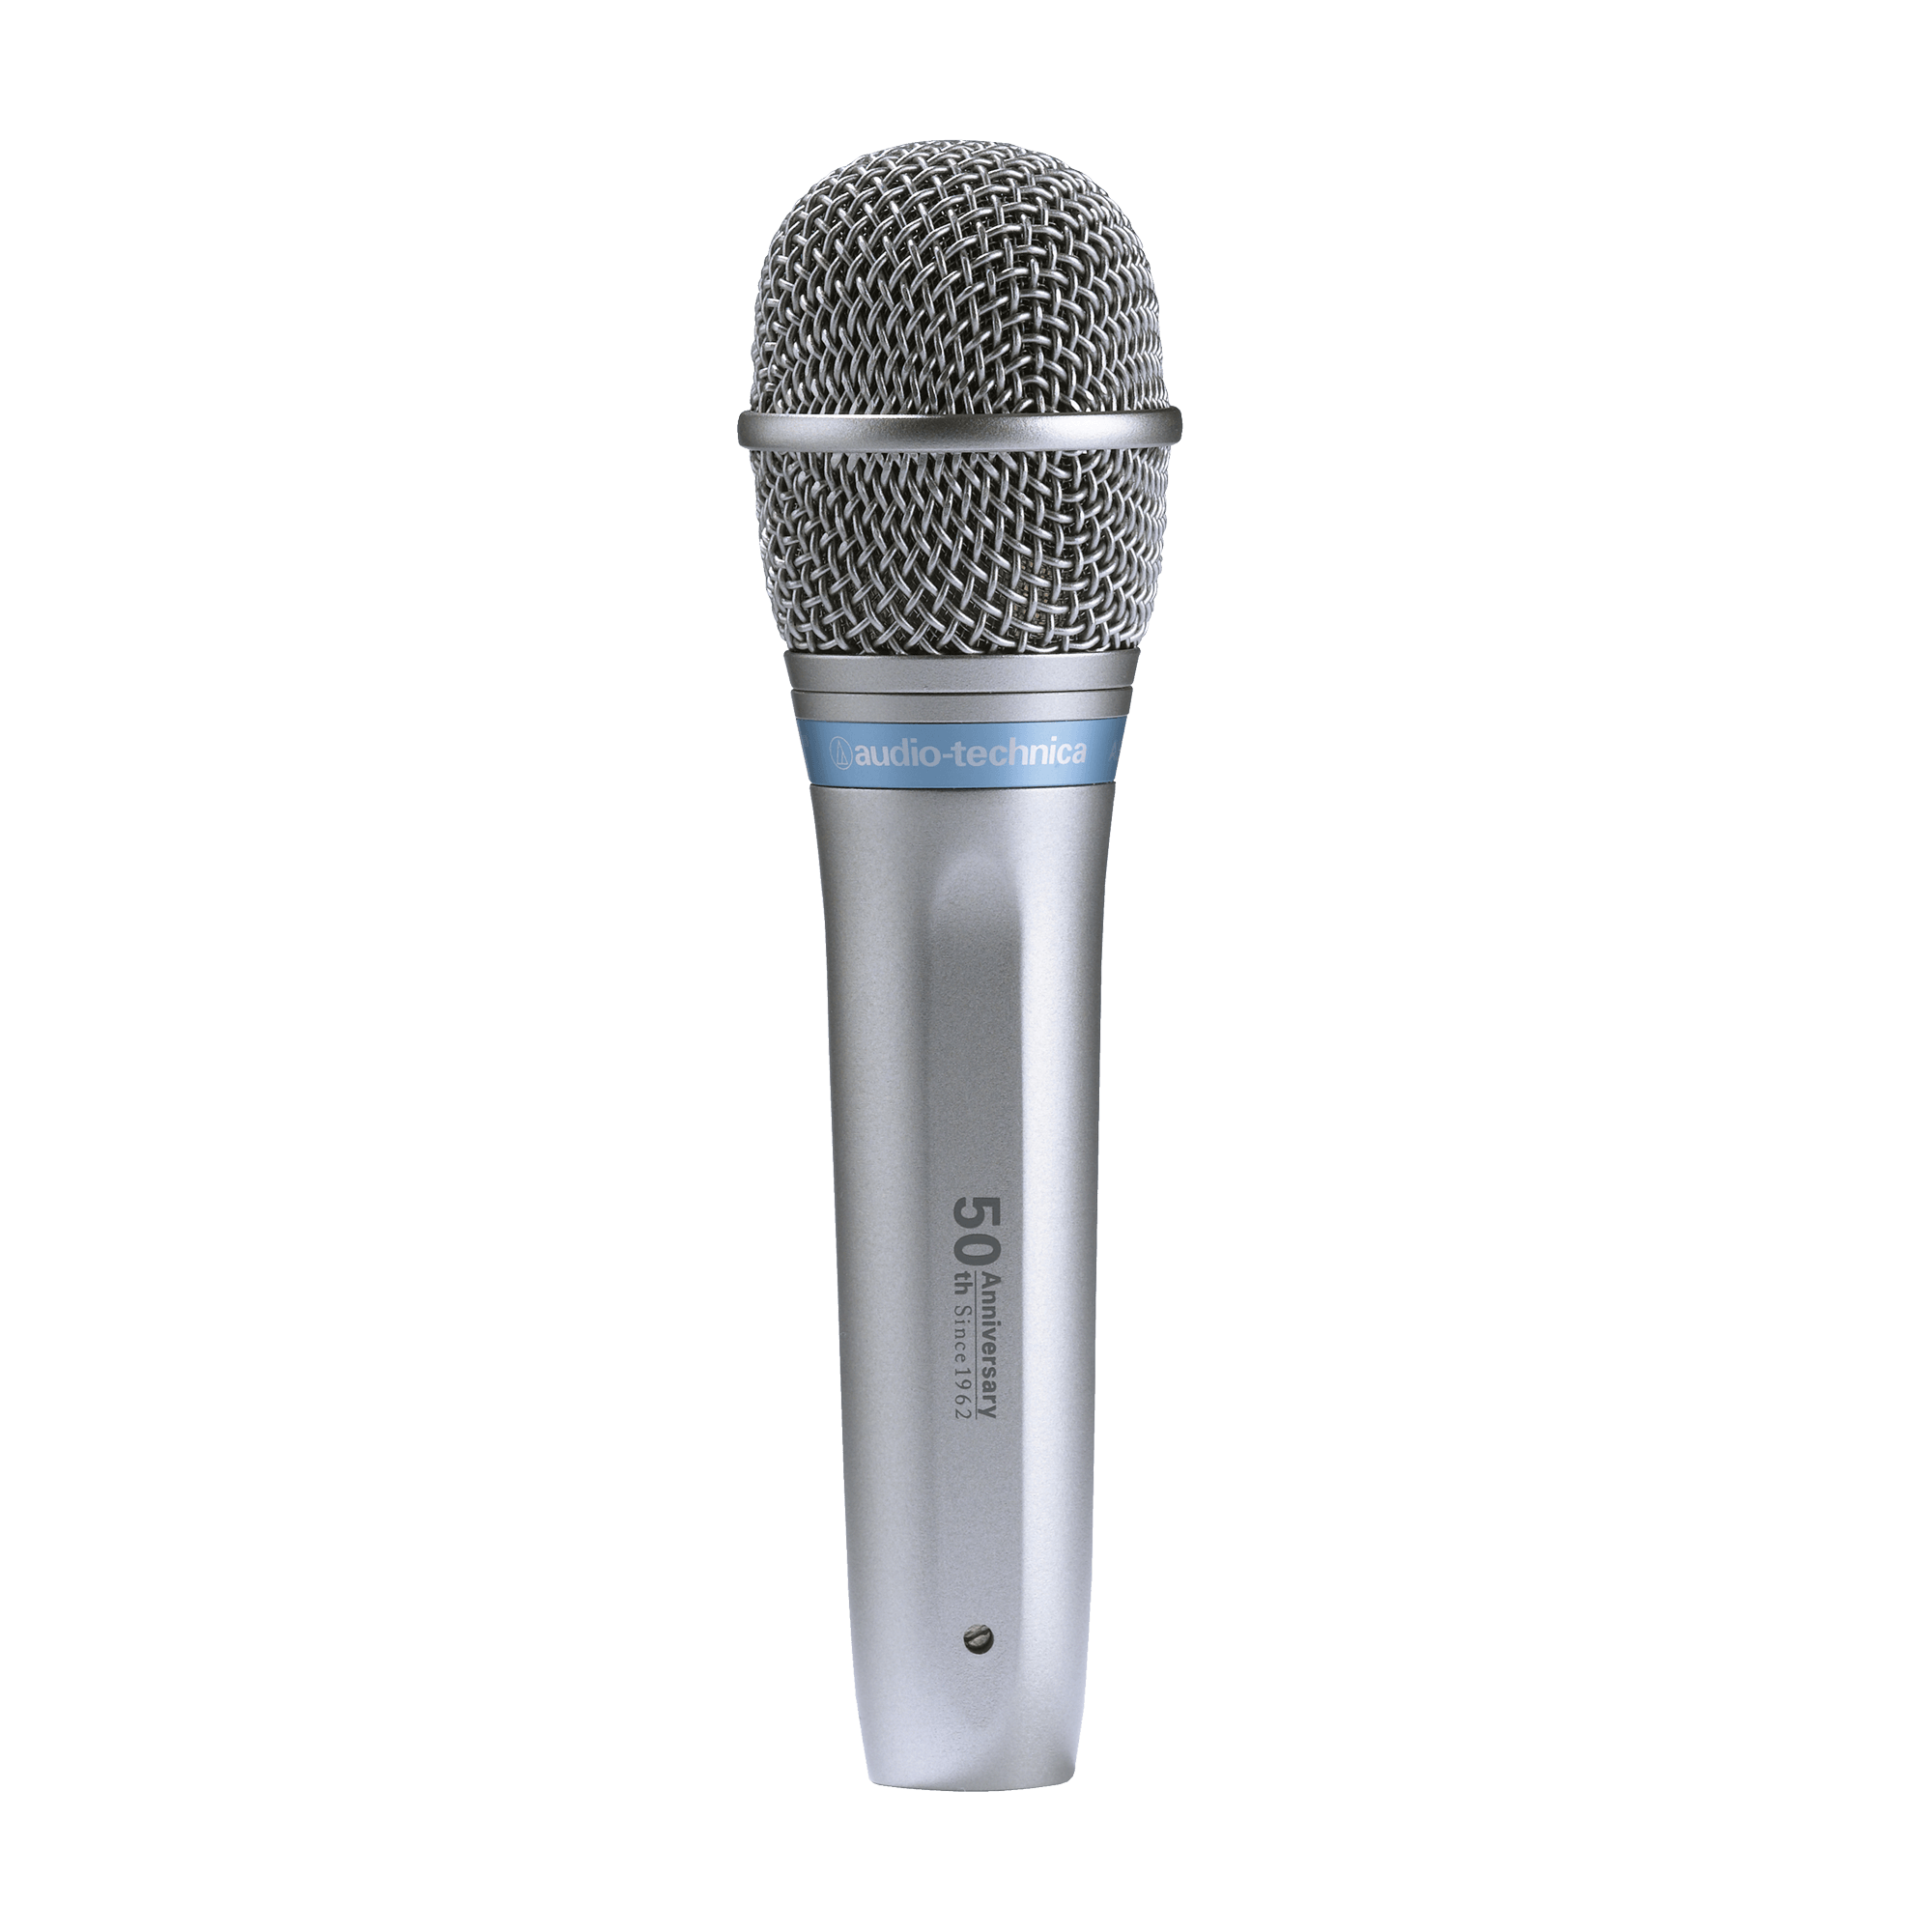 AE4100/LE LIMITED EDITION Cardioid Dynamic Handheld Microphone